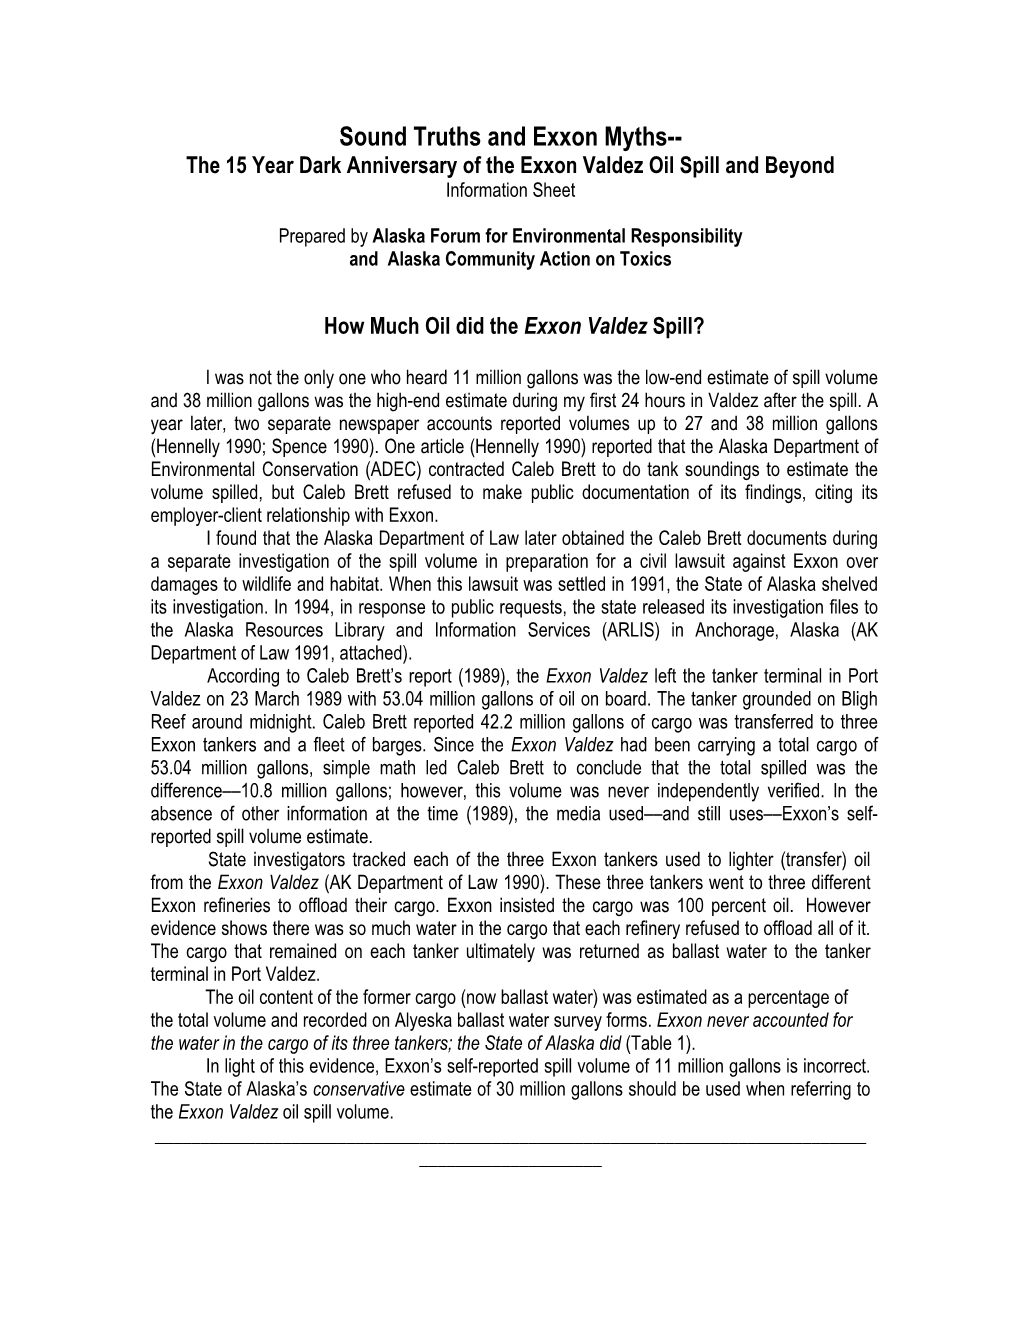 Sound Truths and Exxon Myths-- the 15 Year Dark Anniversary of the Exxon Valdez Oil Spill and Beyond Information Sheet